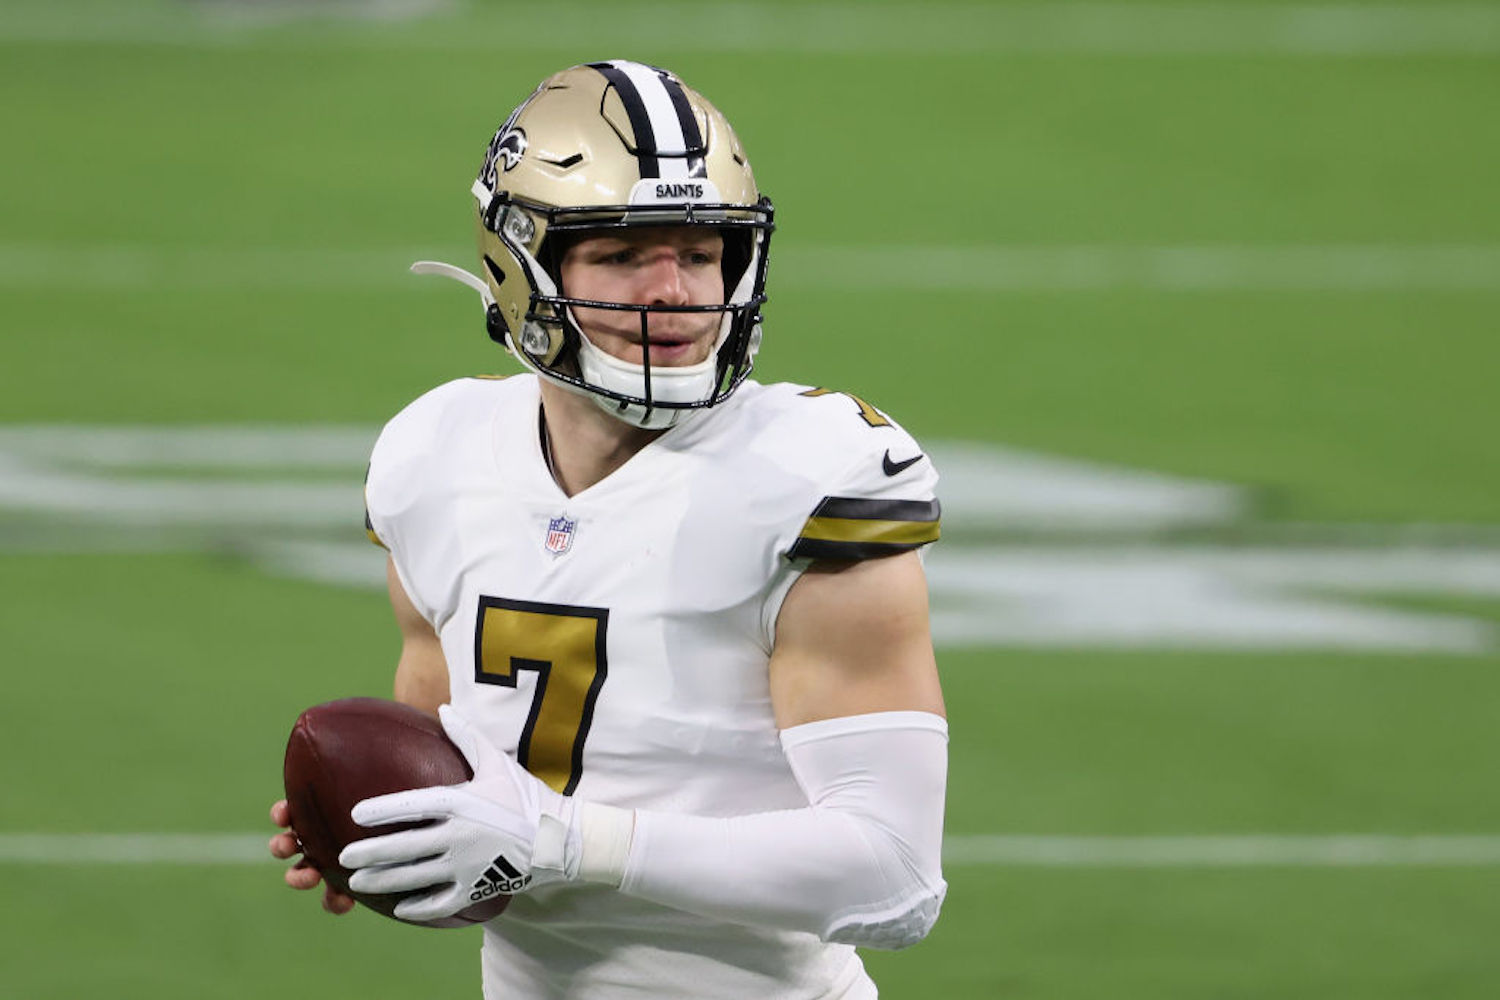 Taysom Hill will reportedly get the start at QB for the New Orleans Saints in Week 11, so how should you handle him in fantasy football?